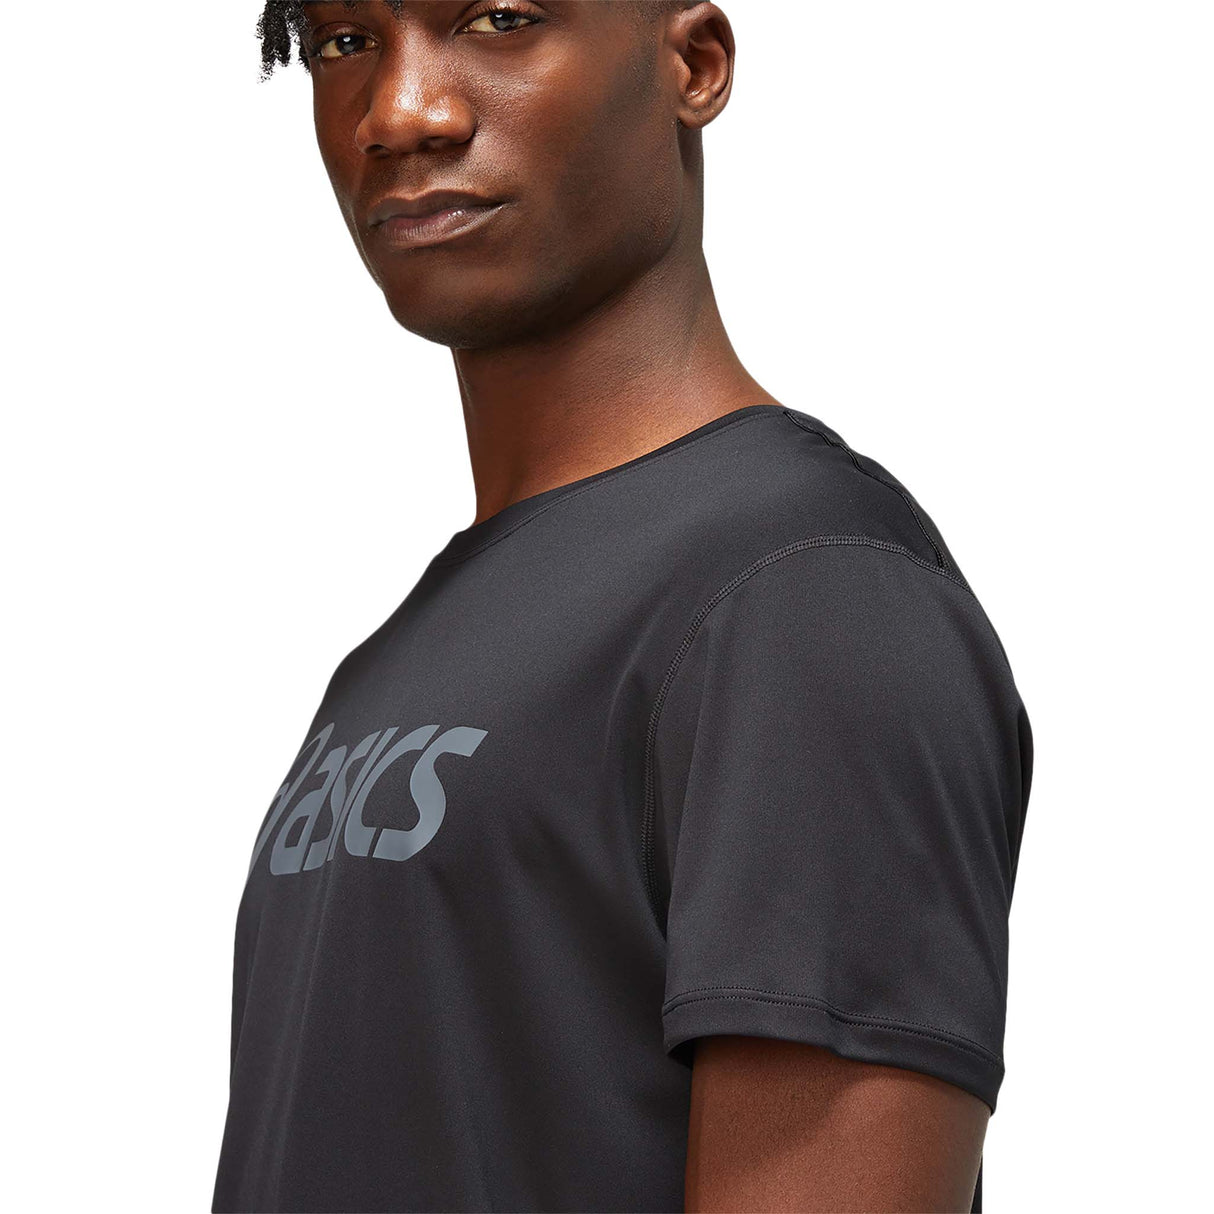 ASICS Silver T-shirt sport à manches courtes performance black carrier grey homme lateral